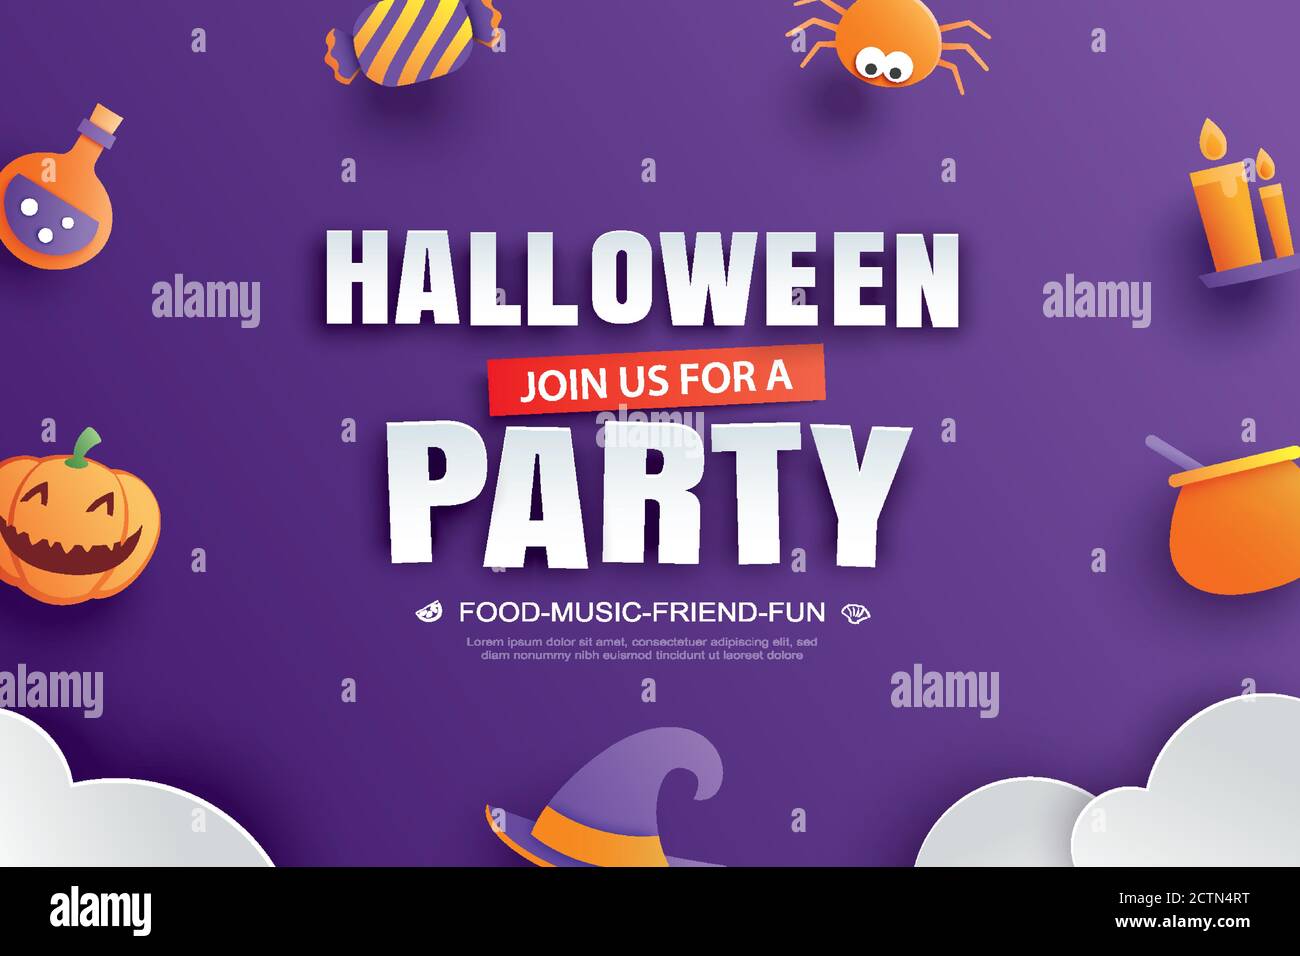 halloween-party-invitation-with-paper-art-element-design-for-greeting-card-banner-poster